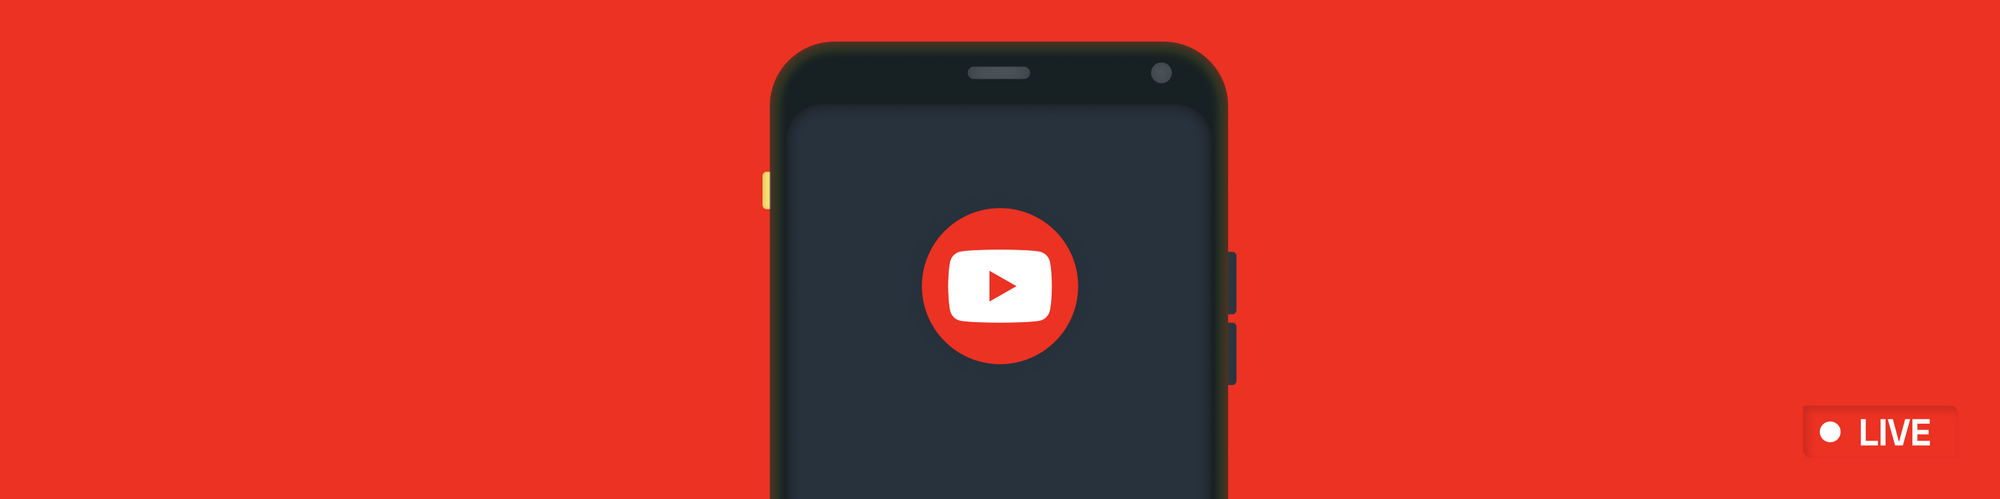 How To Engage Users When Streaming Live On YouTube